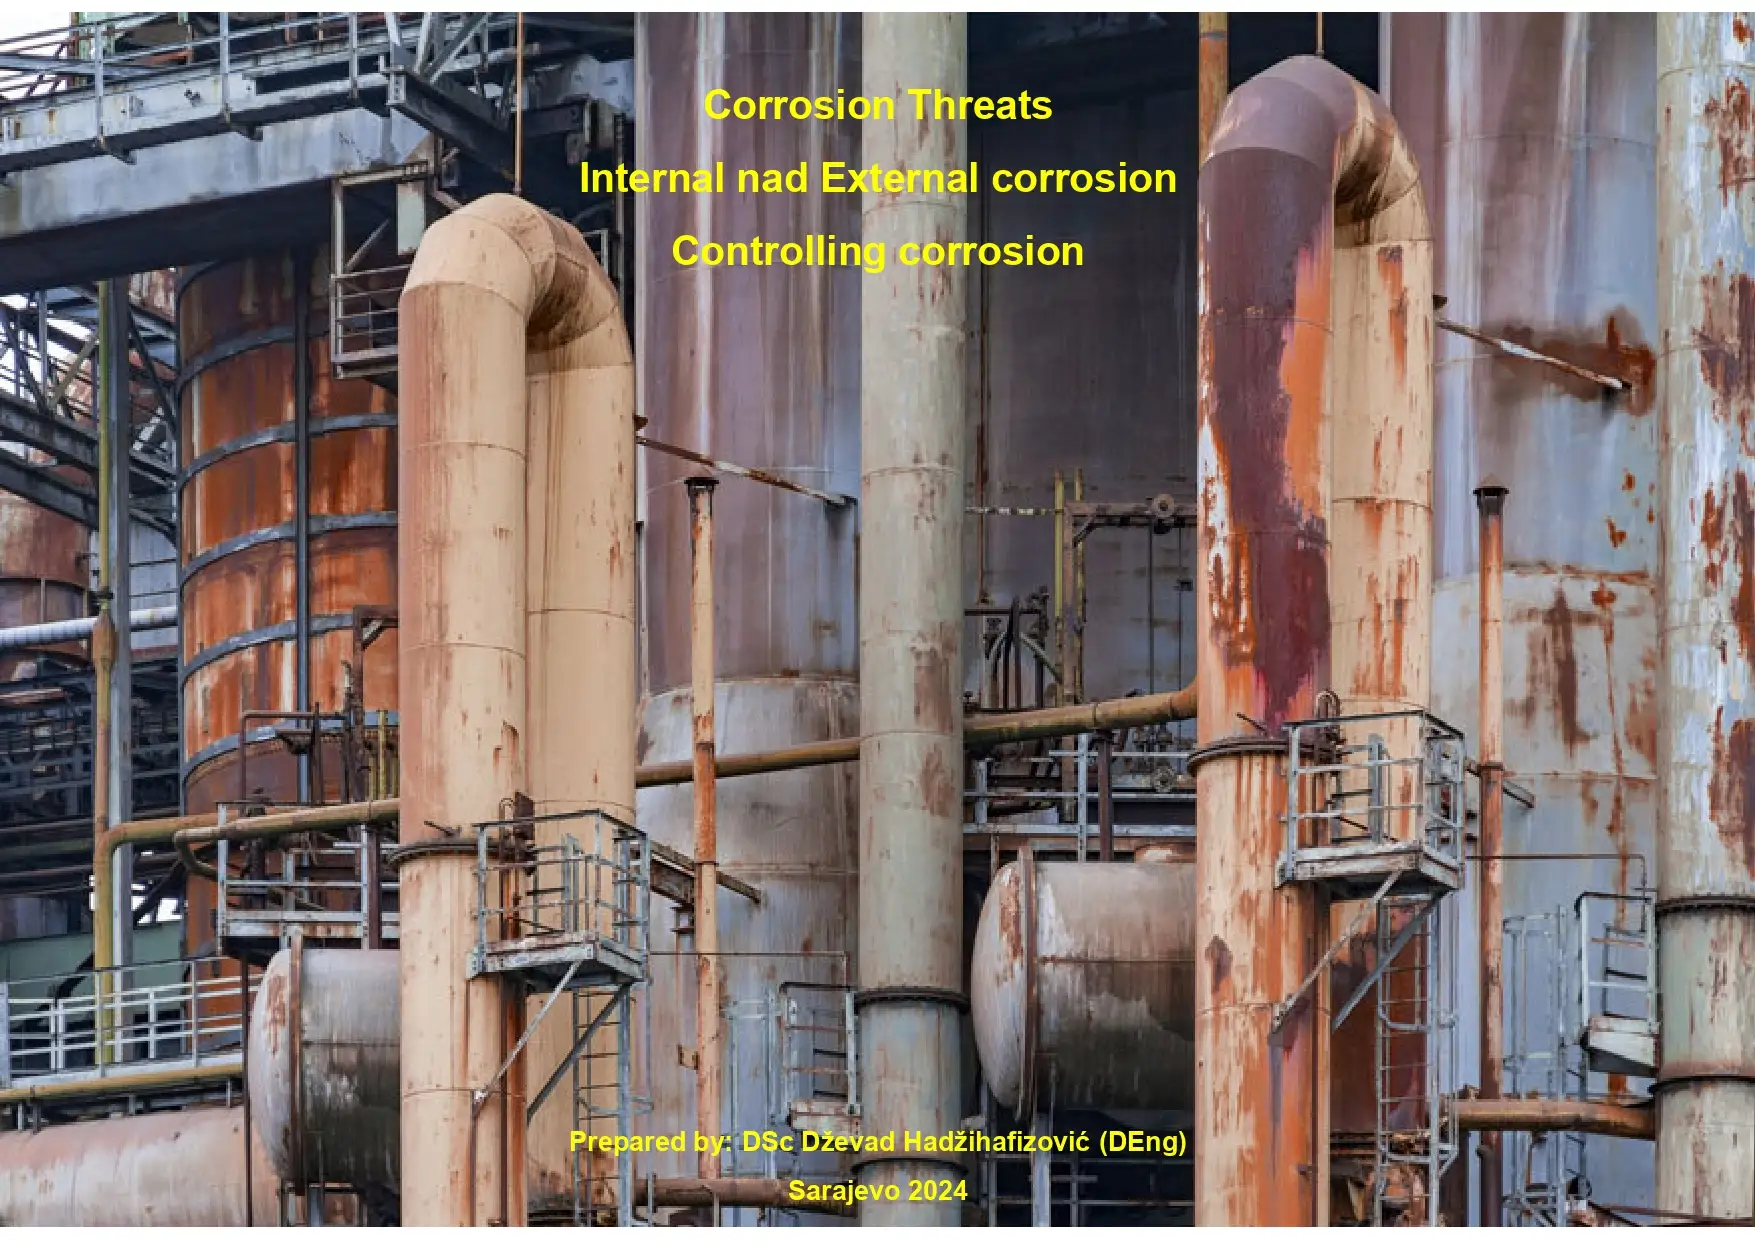 Corrosion Threats Internal and External Corrosion Controlling Corrosion